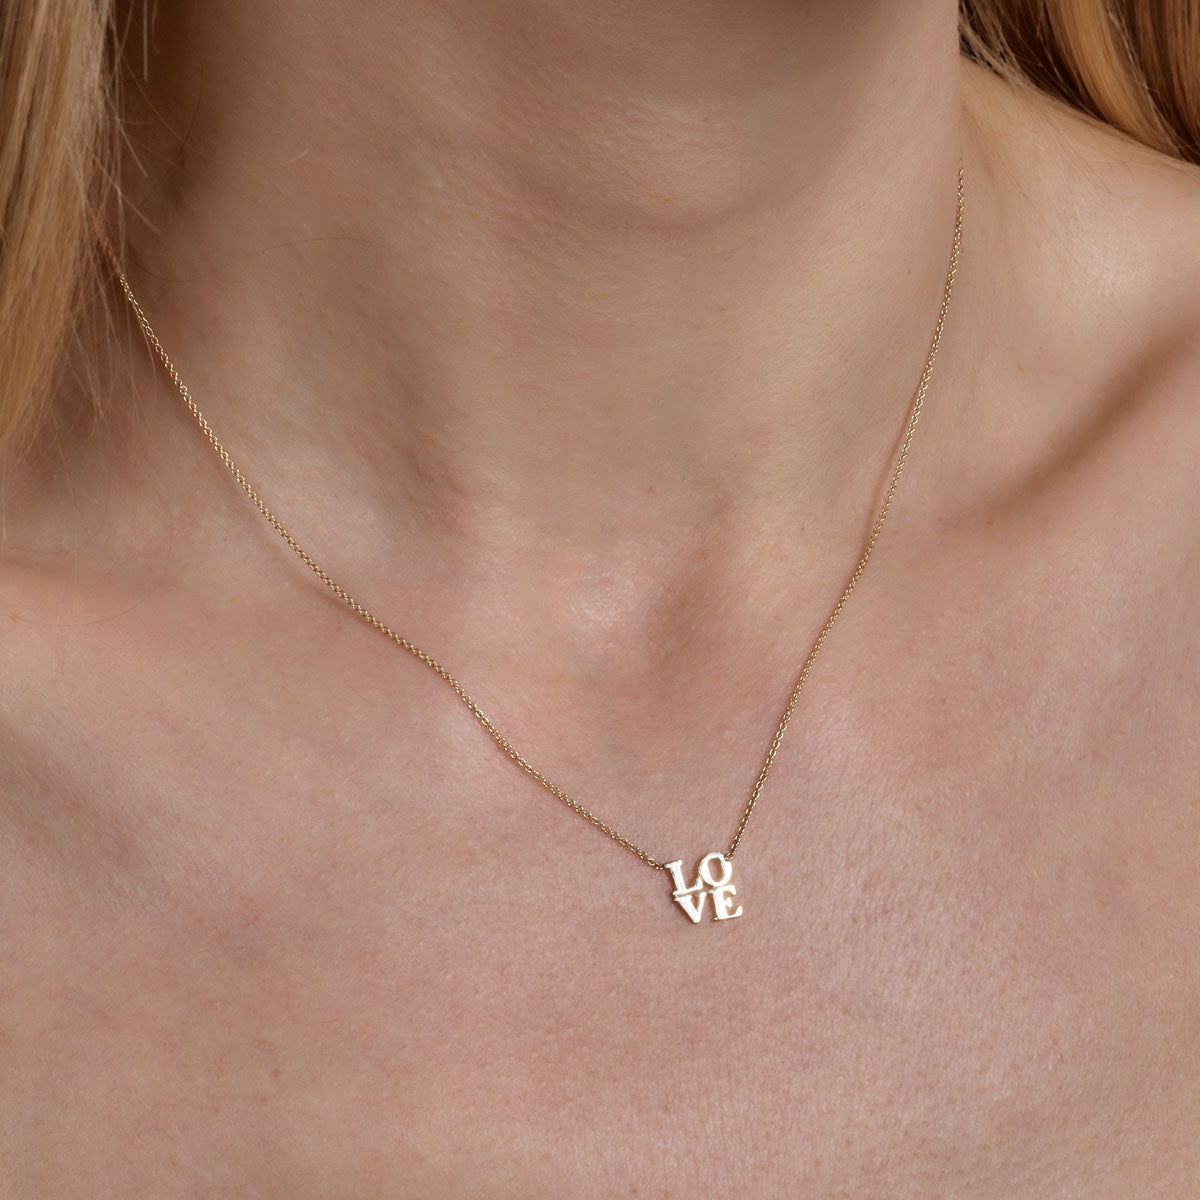 gold LOVE necklace on womans neck